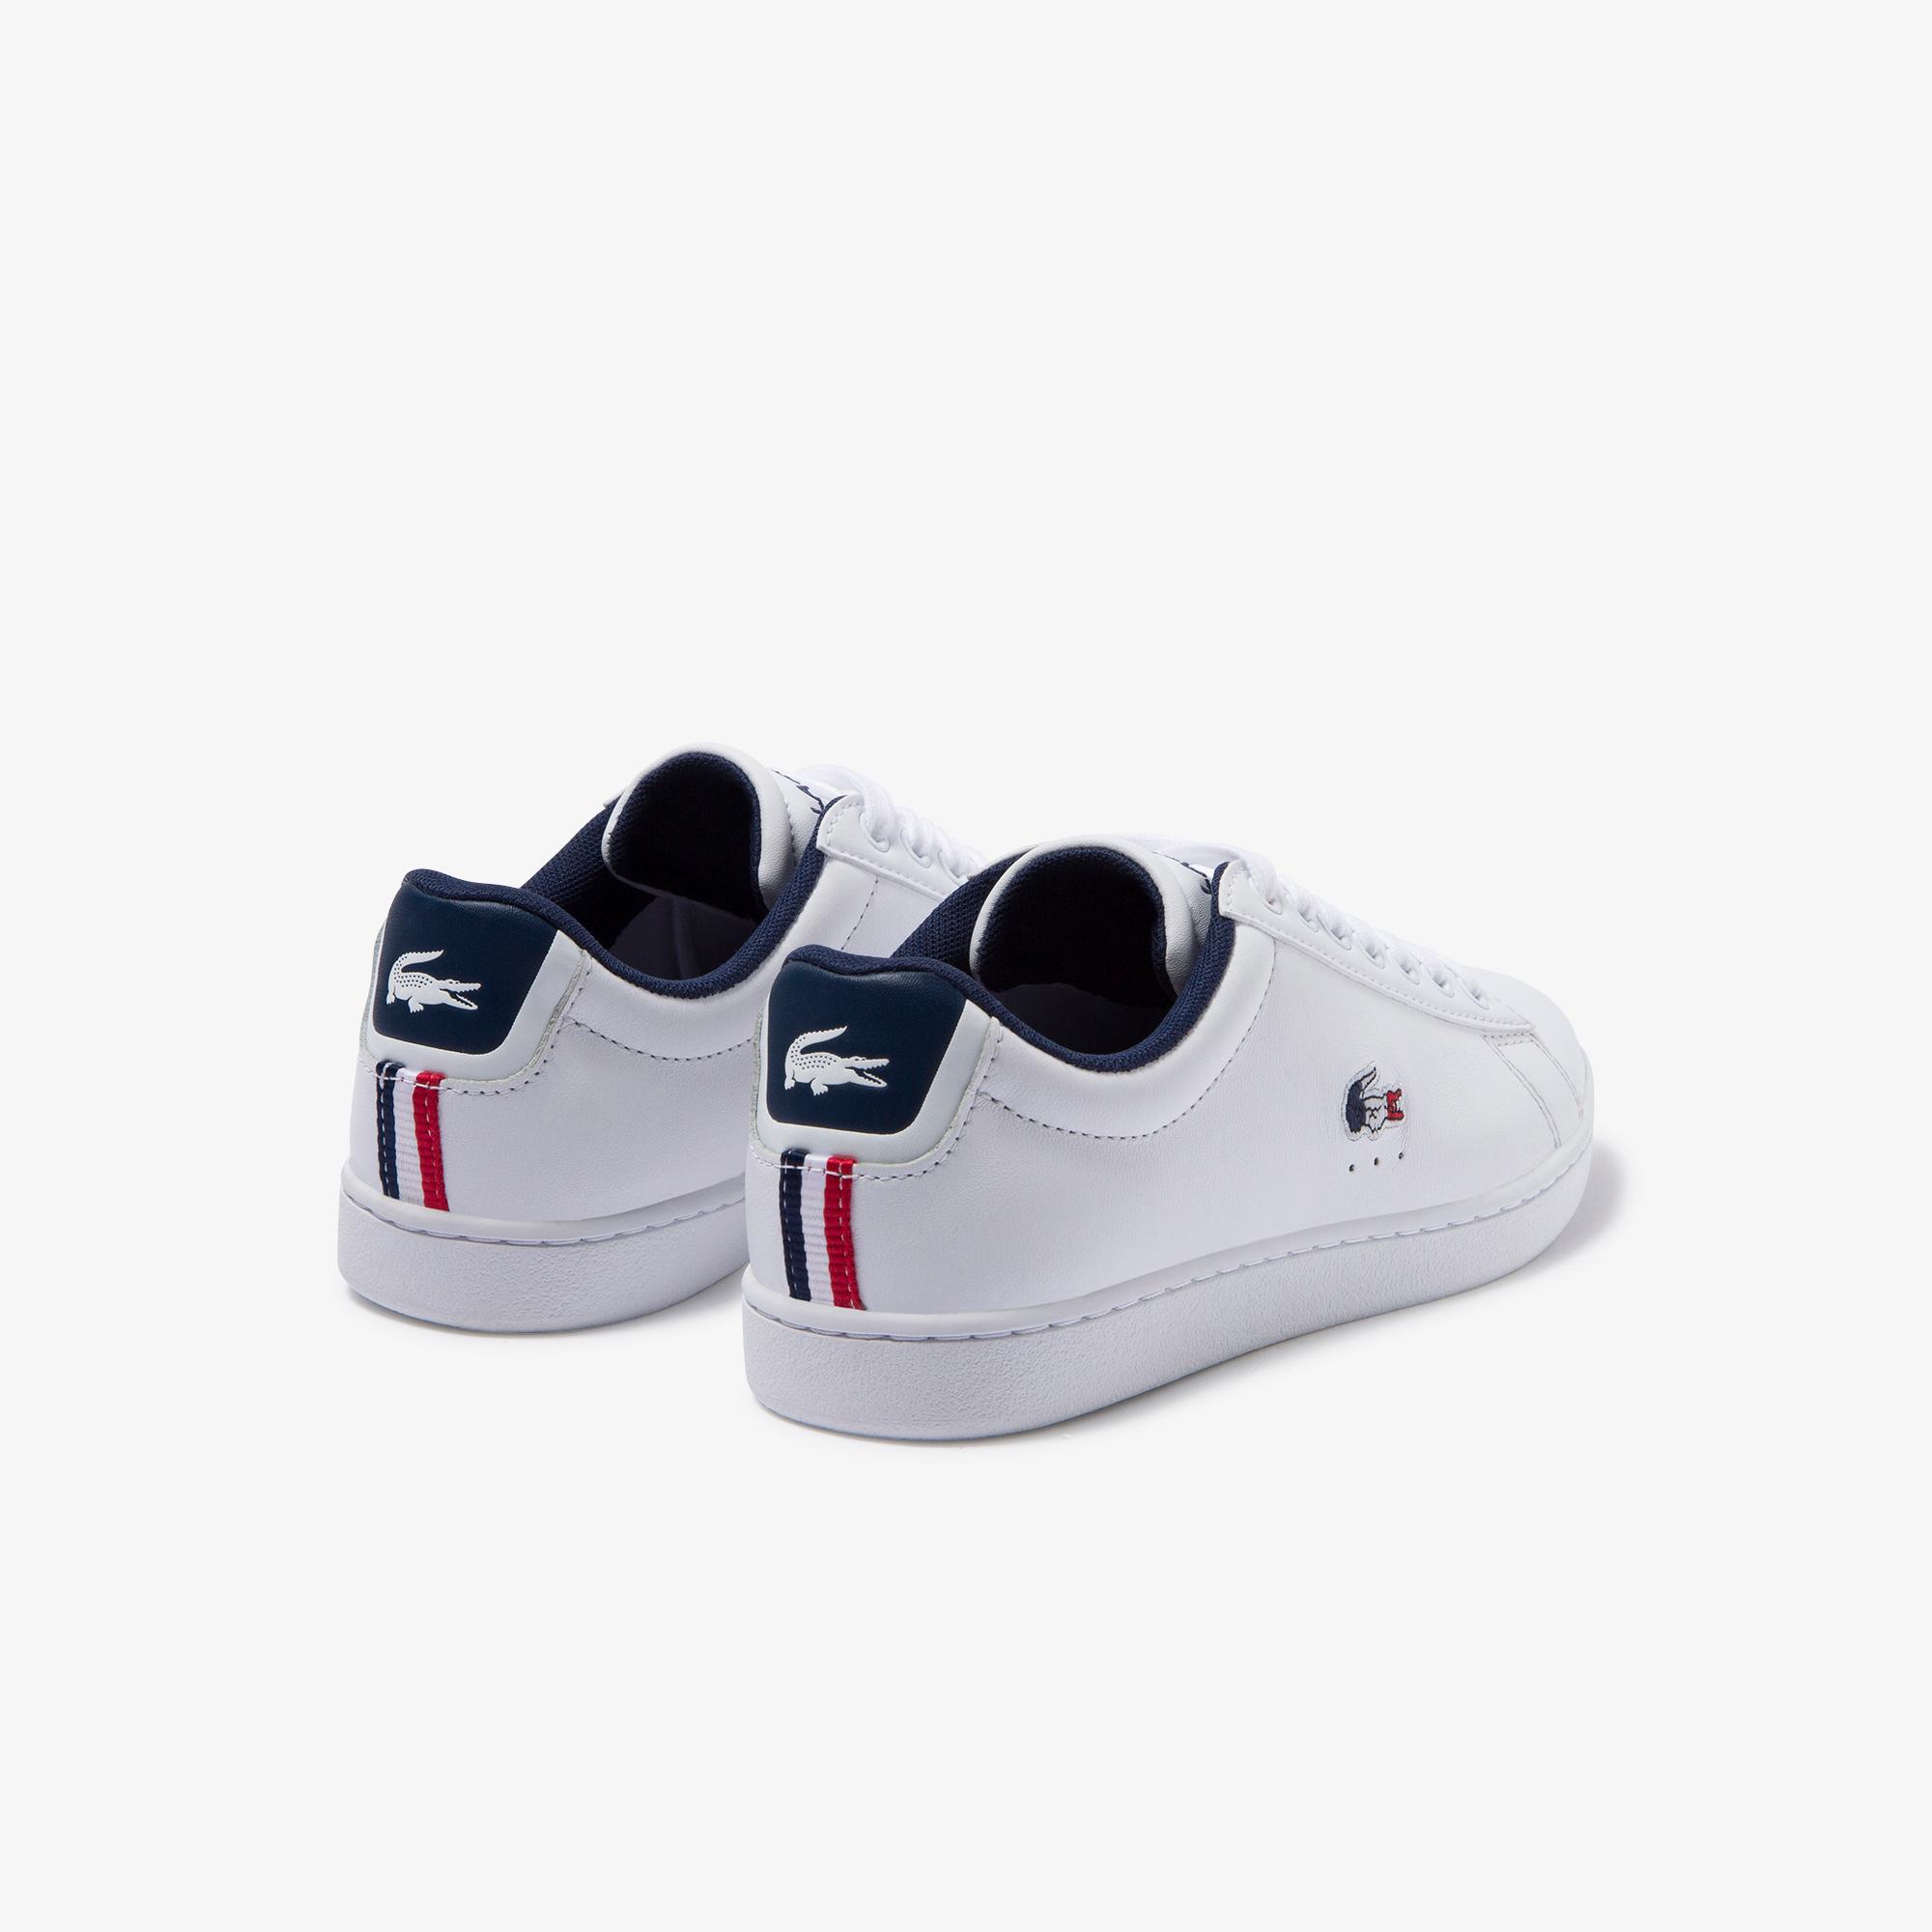 Lacoste Women's Carnaby Evo Tricolore Leather and Synthetic Trainers